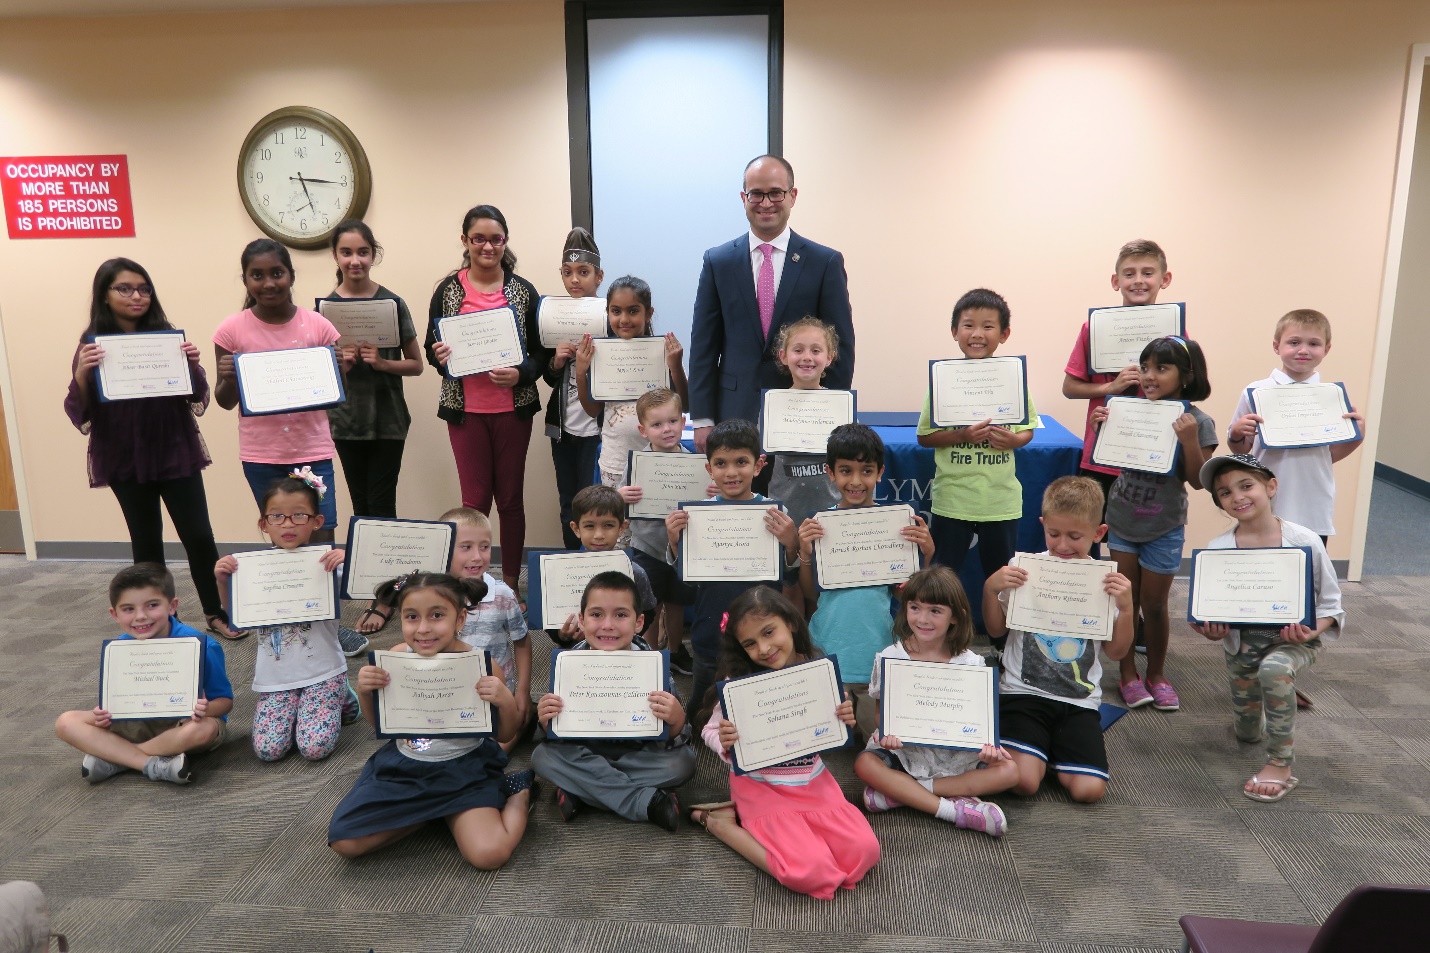 Assemblyman Ed Ra (R-Franklin Square) hosted a celebration for the local students who completed the New York State Assembly 2018 Summer Reading Challenge at the Hillside Public Library on Tuesday, Oc